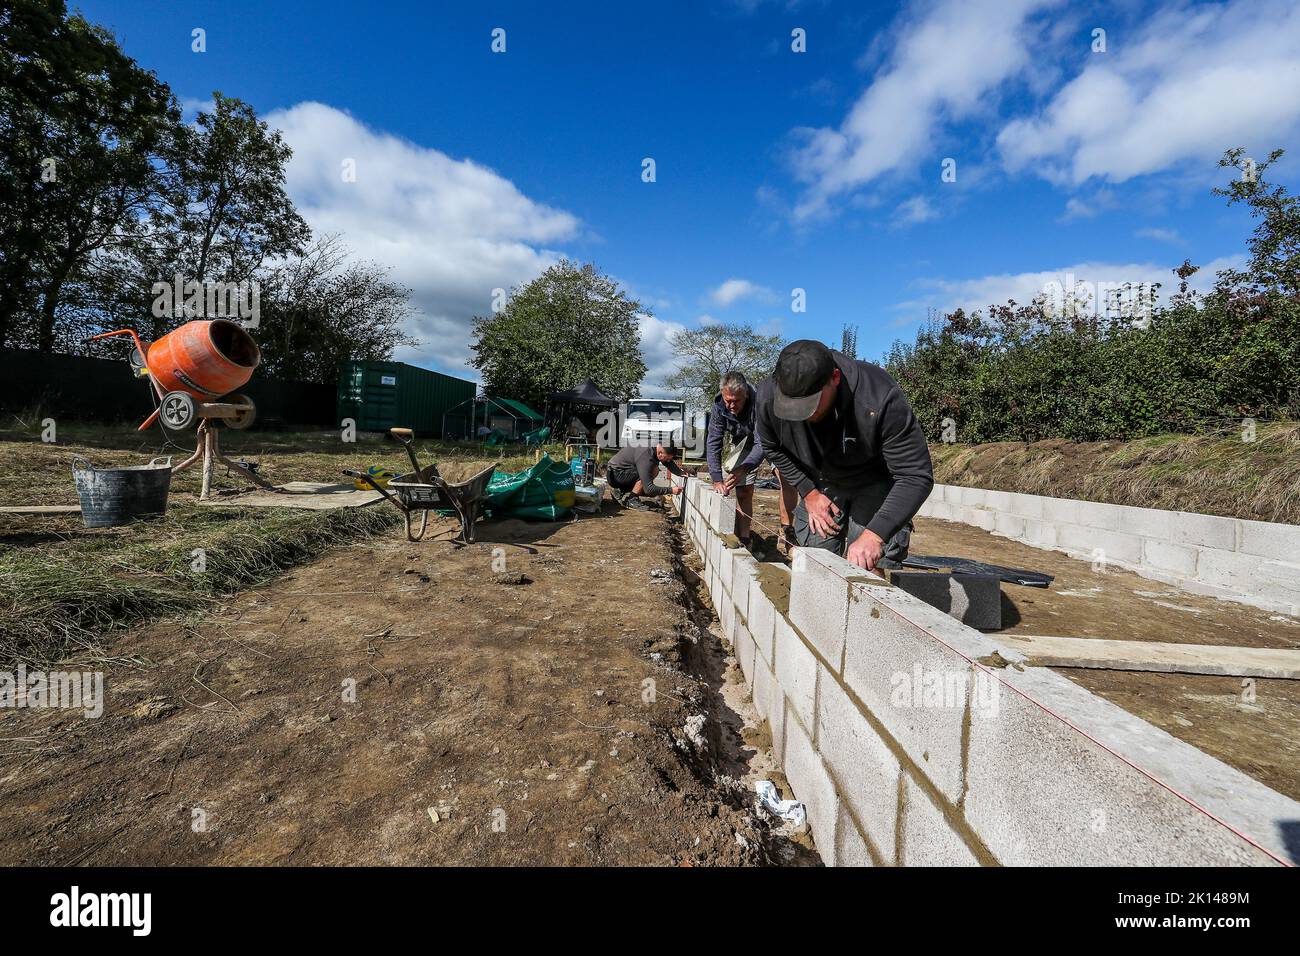 Rural construction. Building a stable base within grazing paddocks. Stock Photo